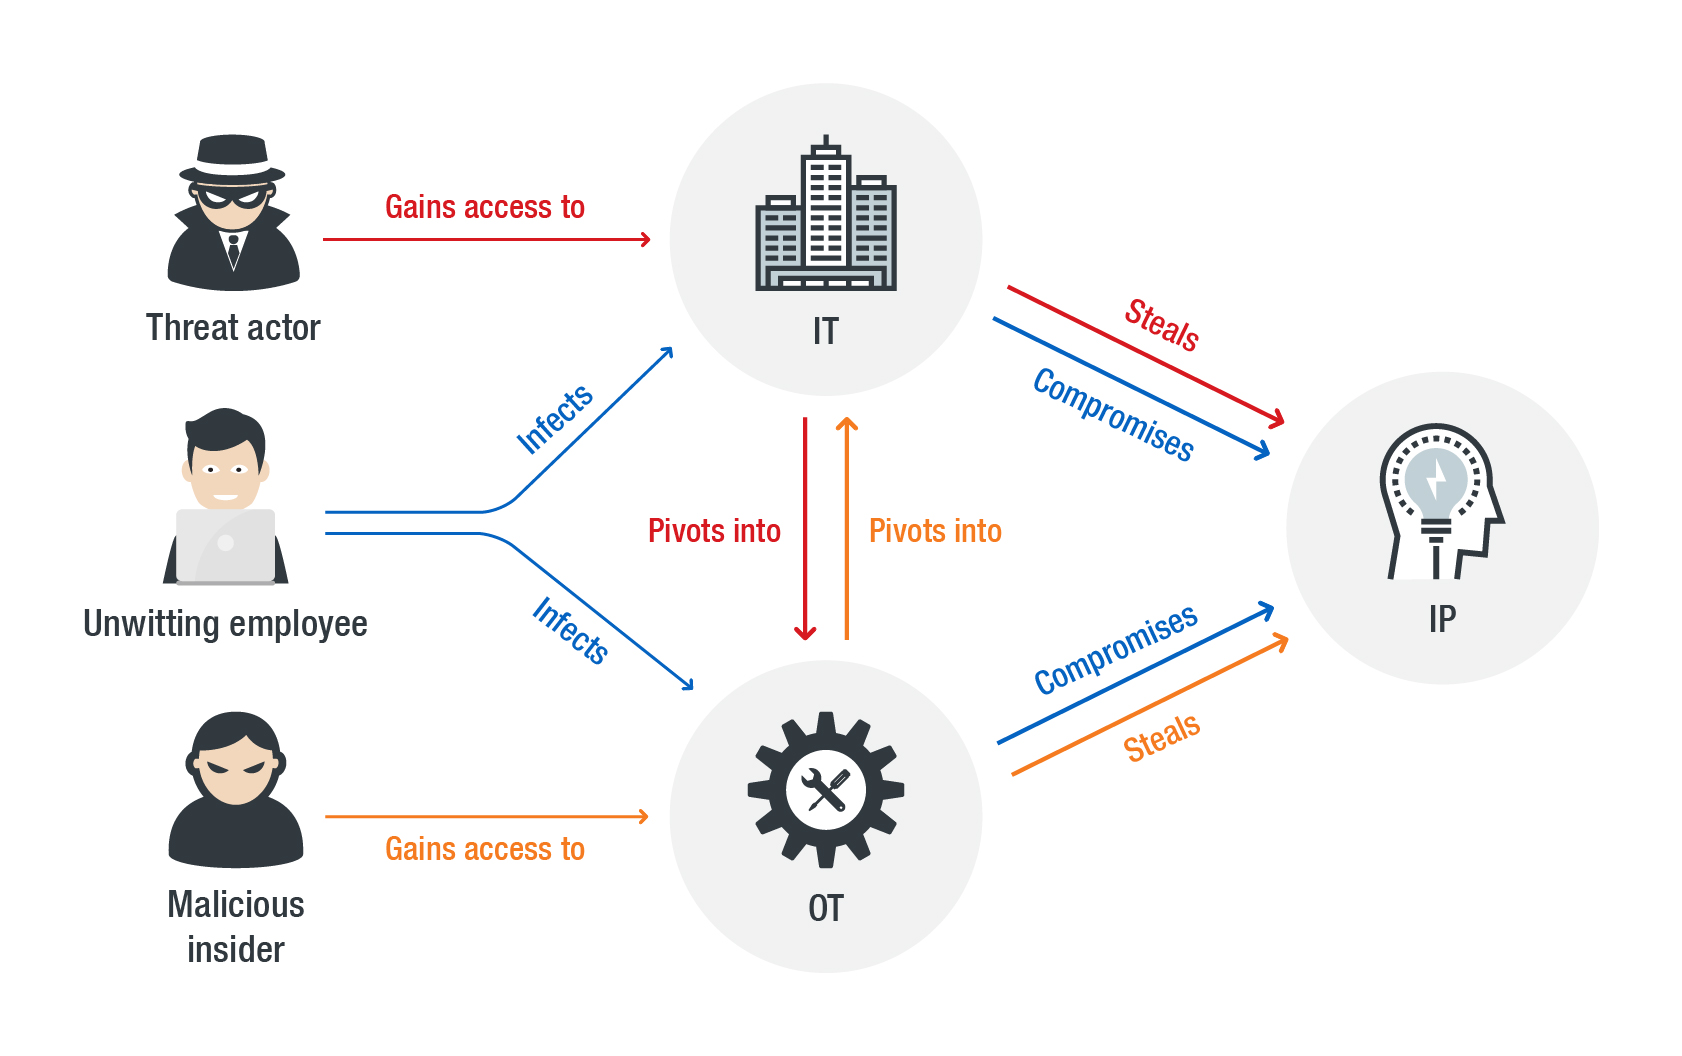 Gaining access. It/ot Convergence картинки. Threat. Threat to of. Industry 4.0 and left Politics.